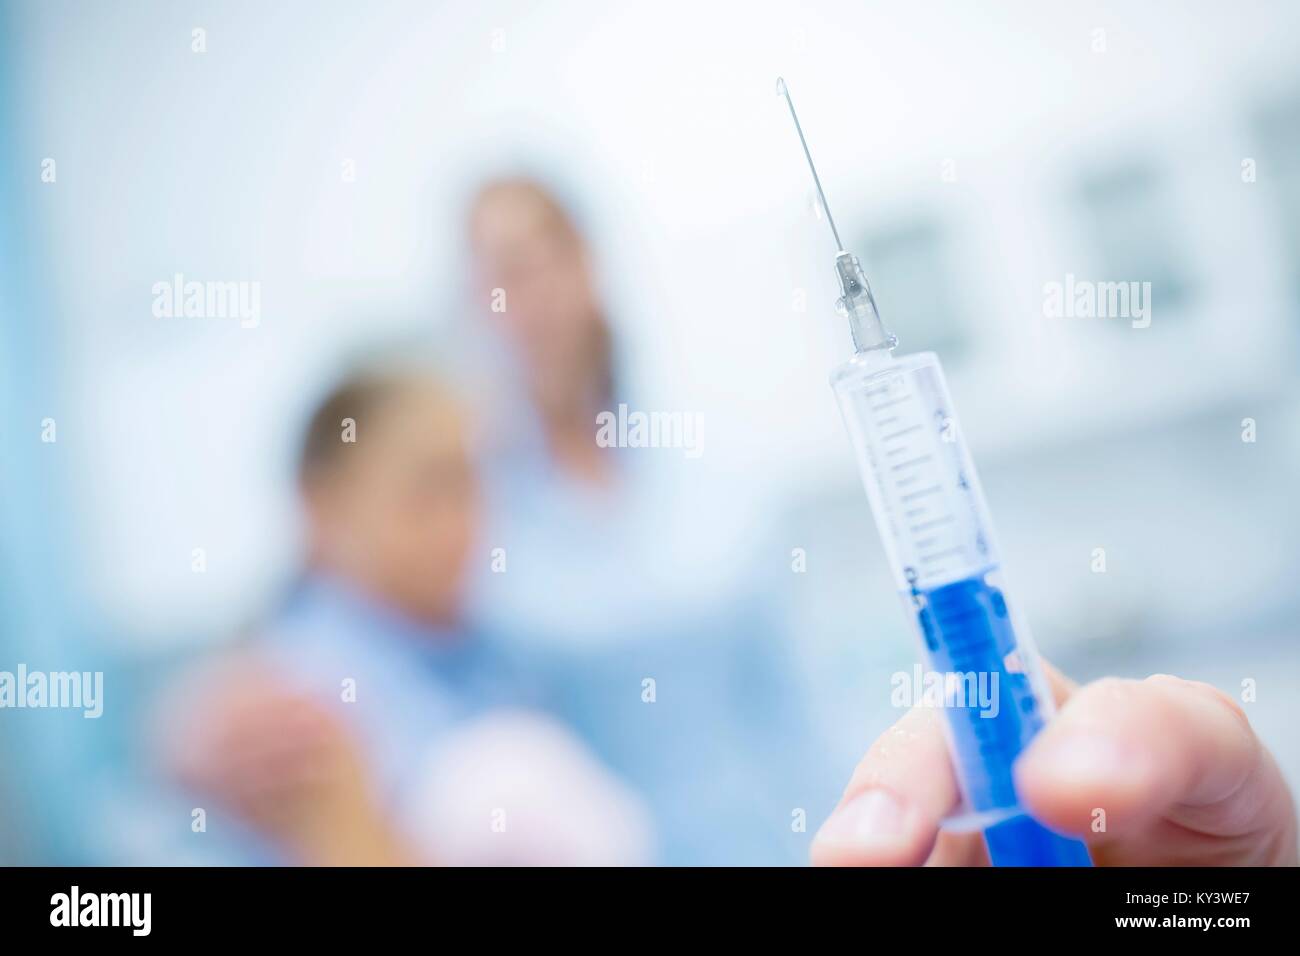 Injection, close up. Stock Photo